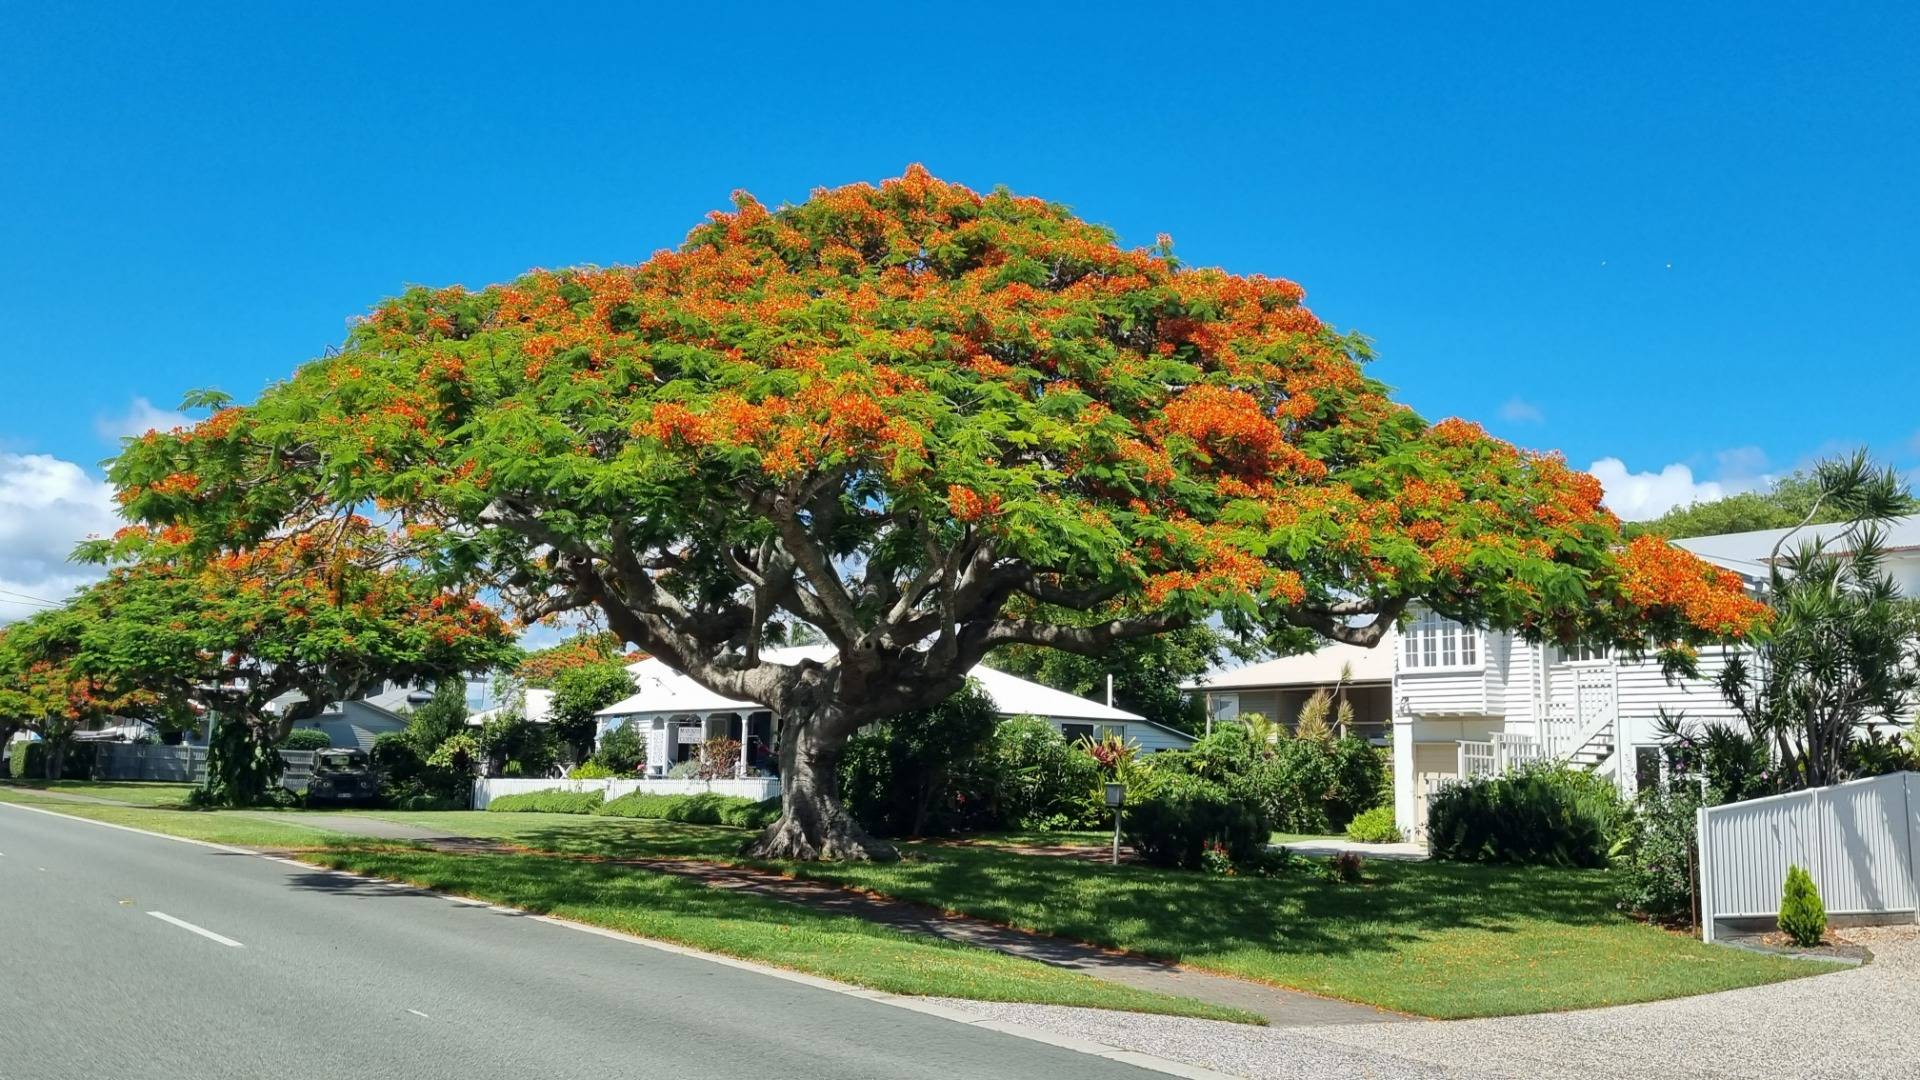 The Poinciana trees are all flowering at the moment making them look like awesome, natural Christmas trees.